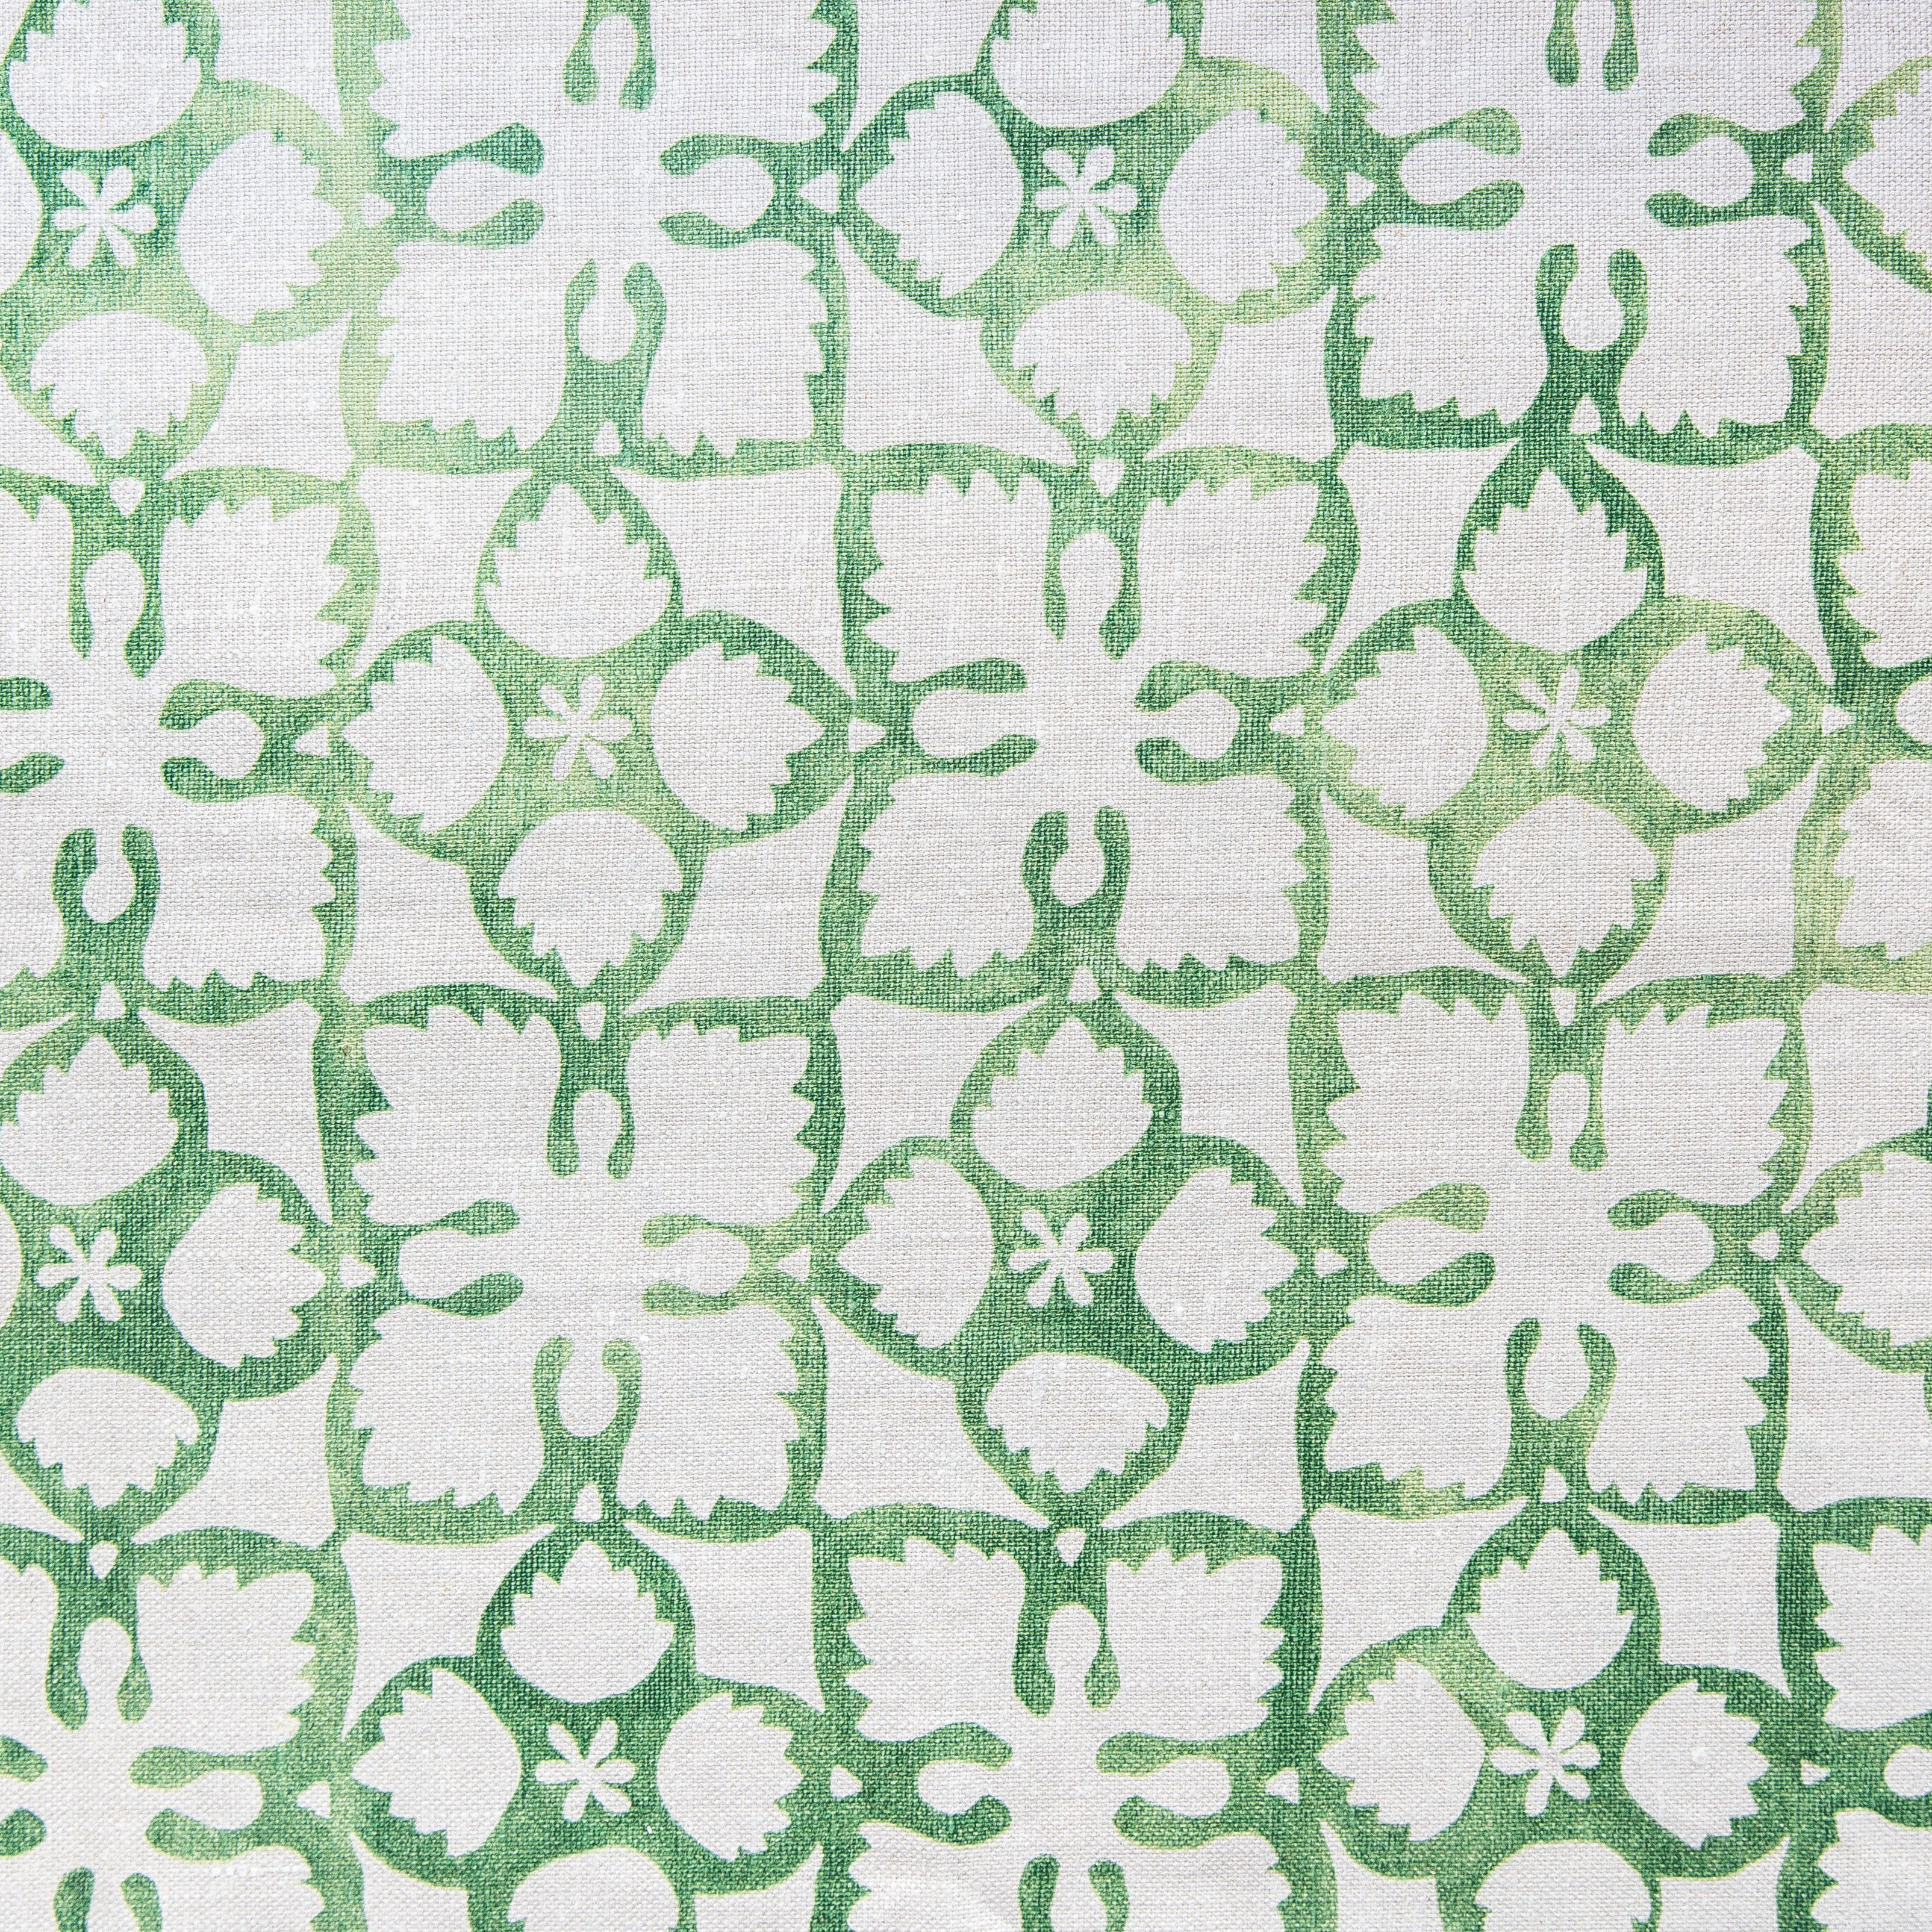 Detail of fabric in a botanical lattice print in green on a white field.